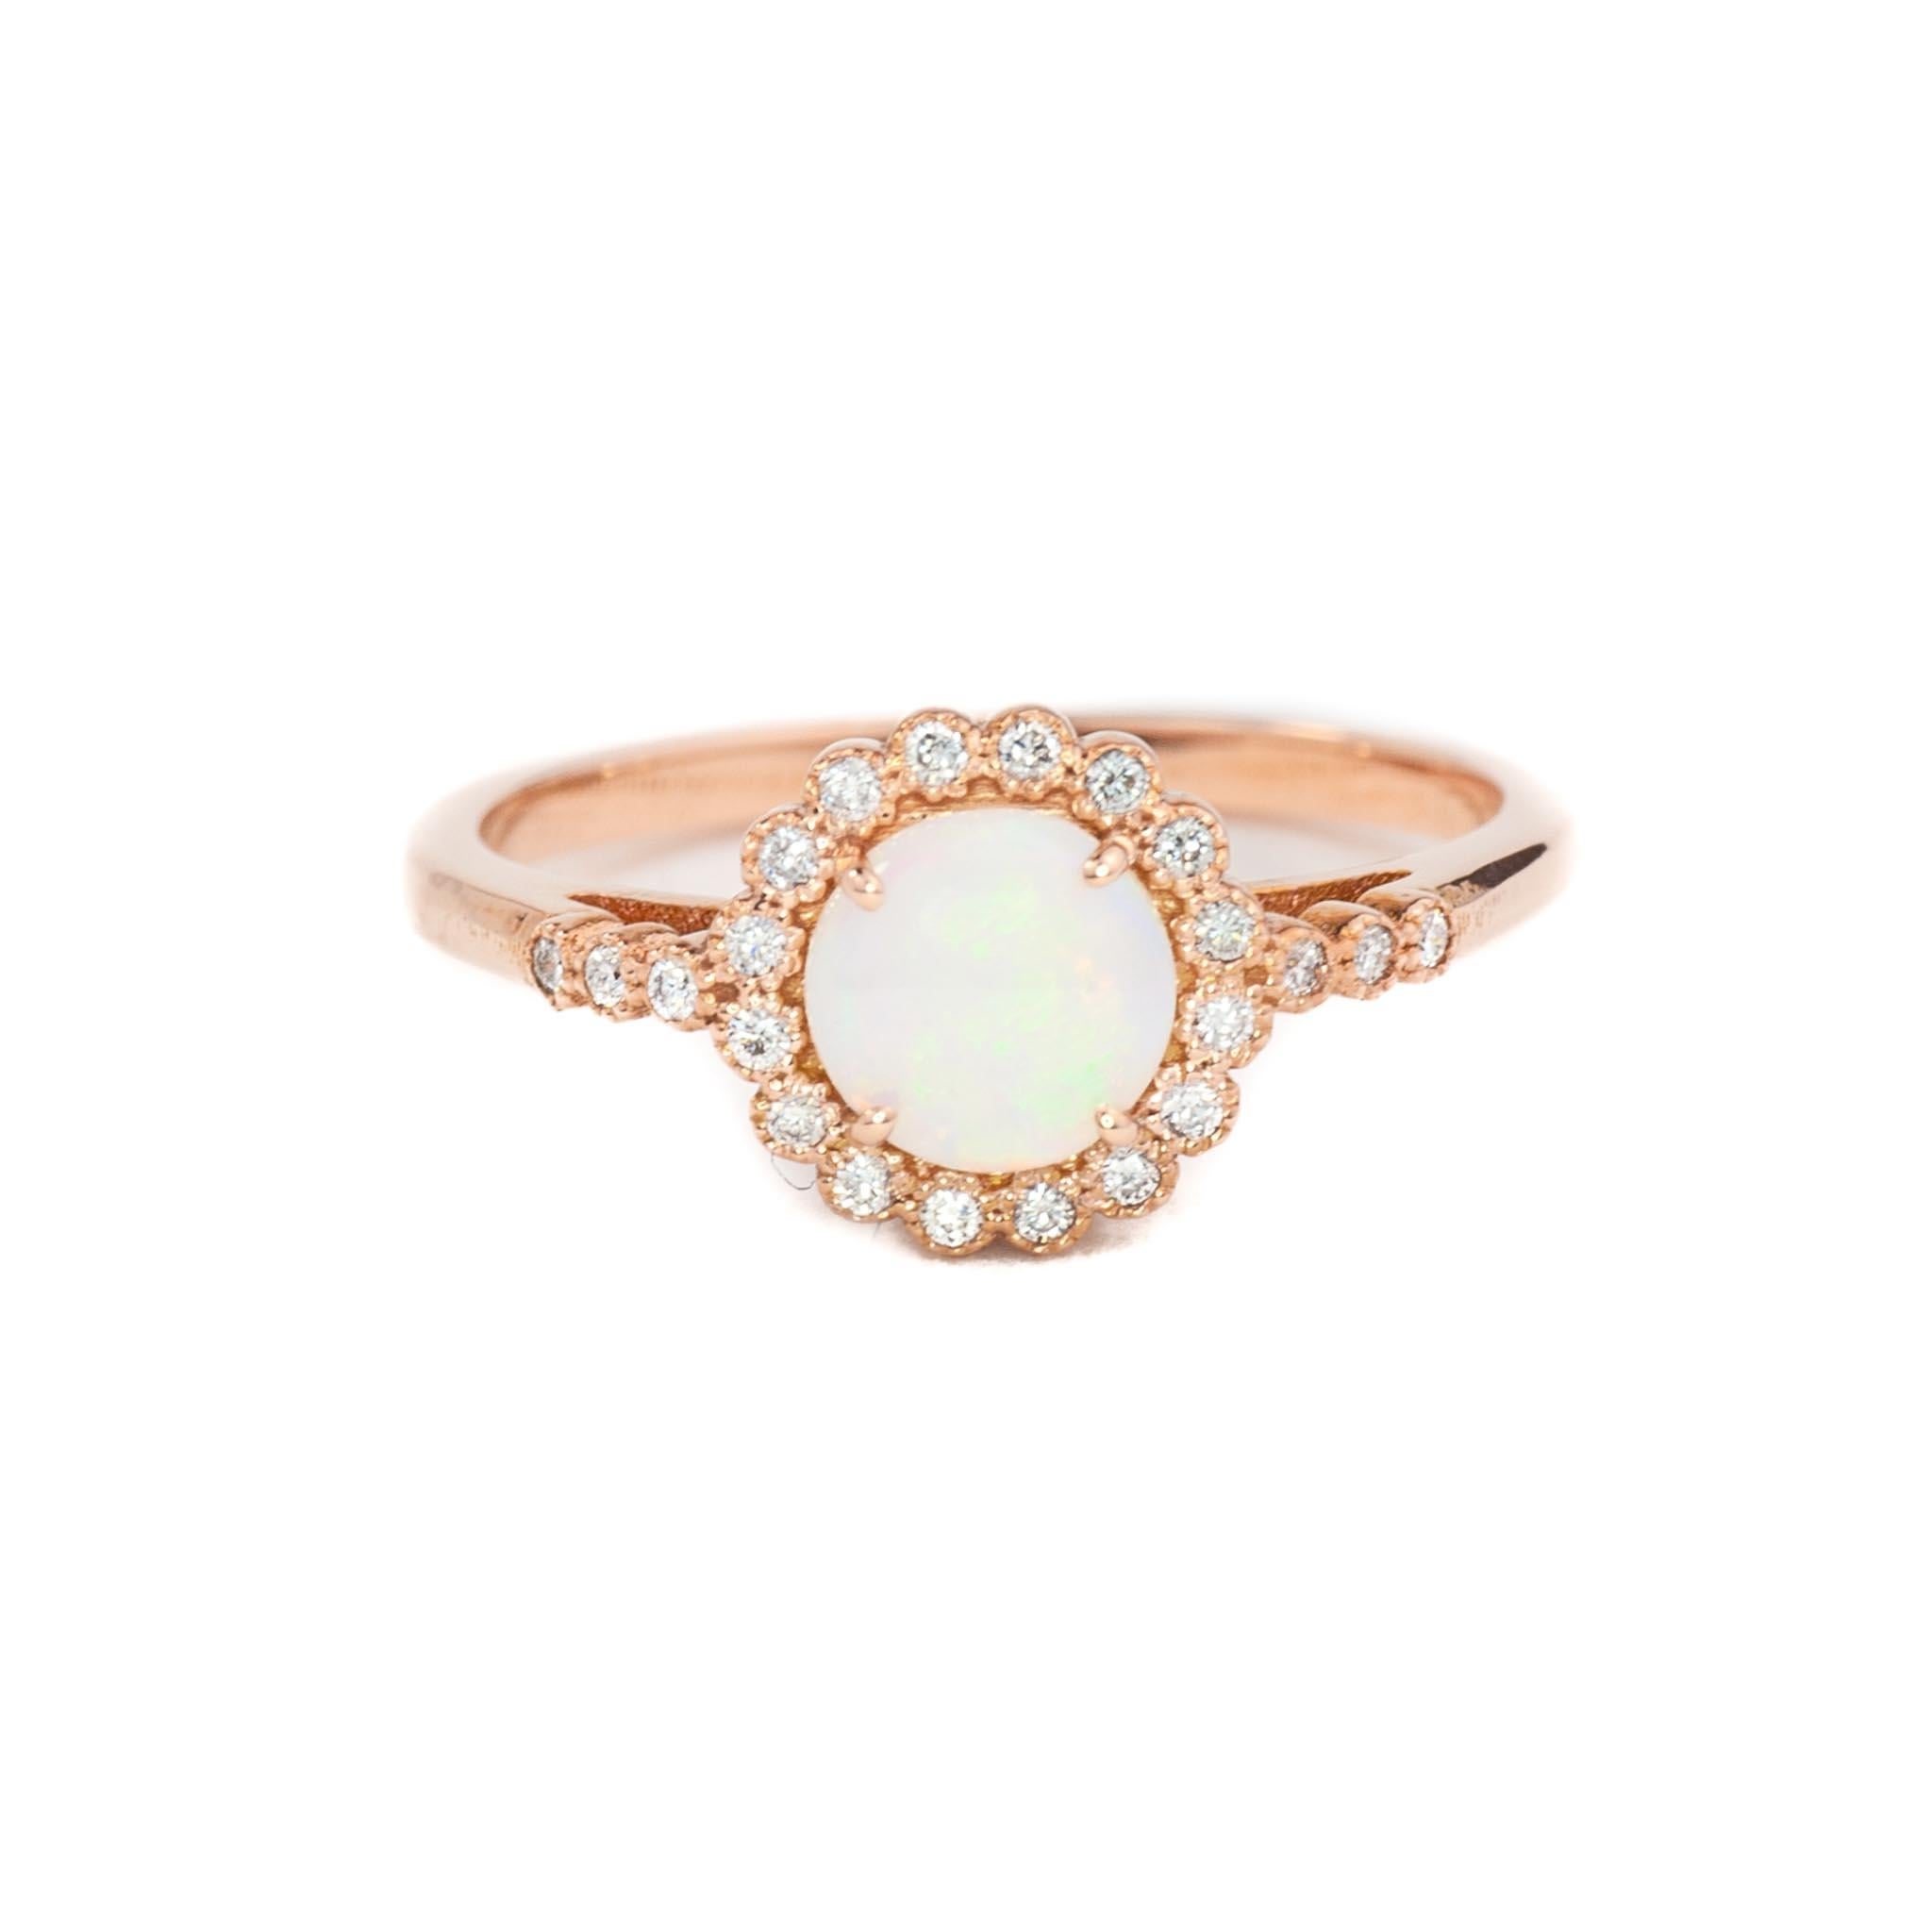 This vintage inspired design features an Australian opal with moissanites in the halo and band.

Australian Opals are better quality than Ethiopian opals.

Ethiopian opals cost significantly less because they are porous and will absorb water. A